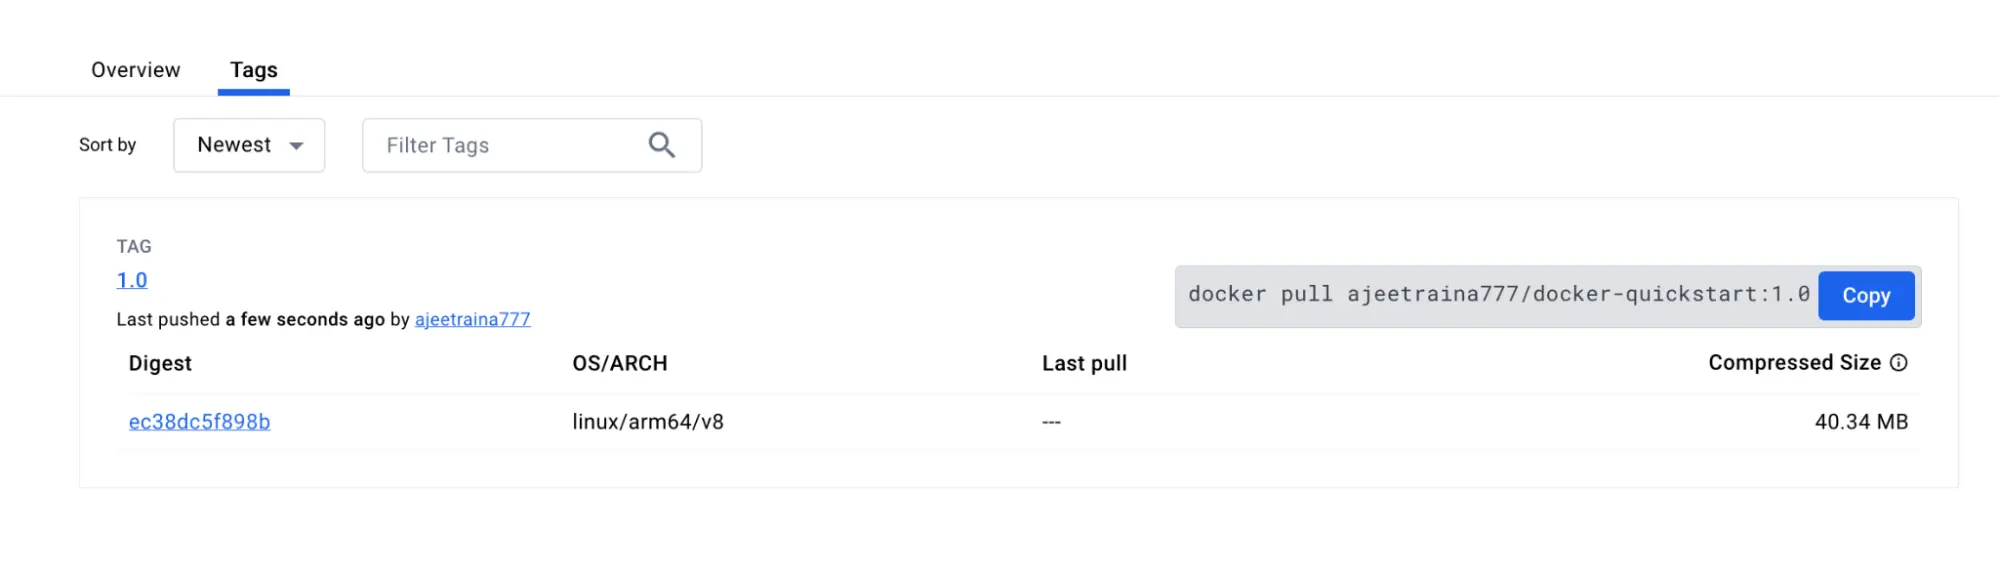 Screenshot of the Docker Hub page that displays the newly added image tag